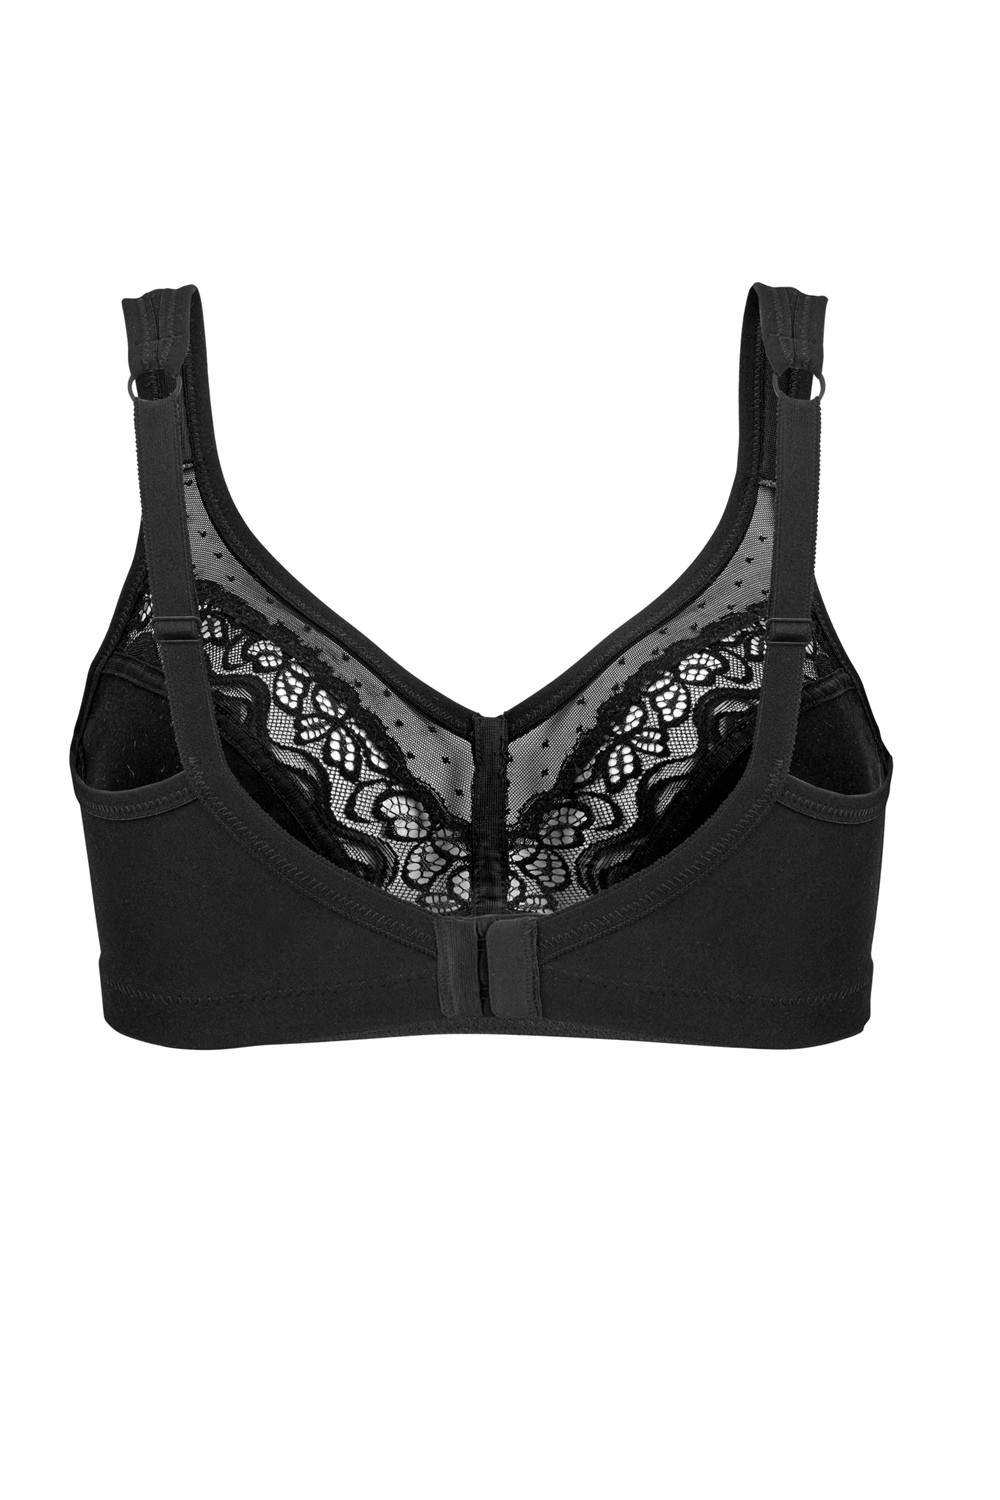 Underwired bra with elastic lace for heavy breasts